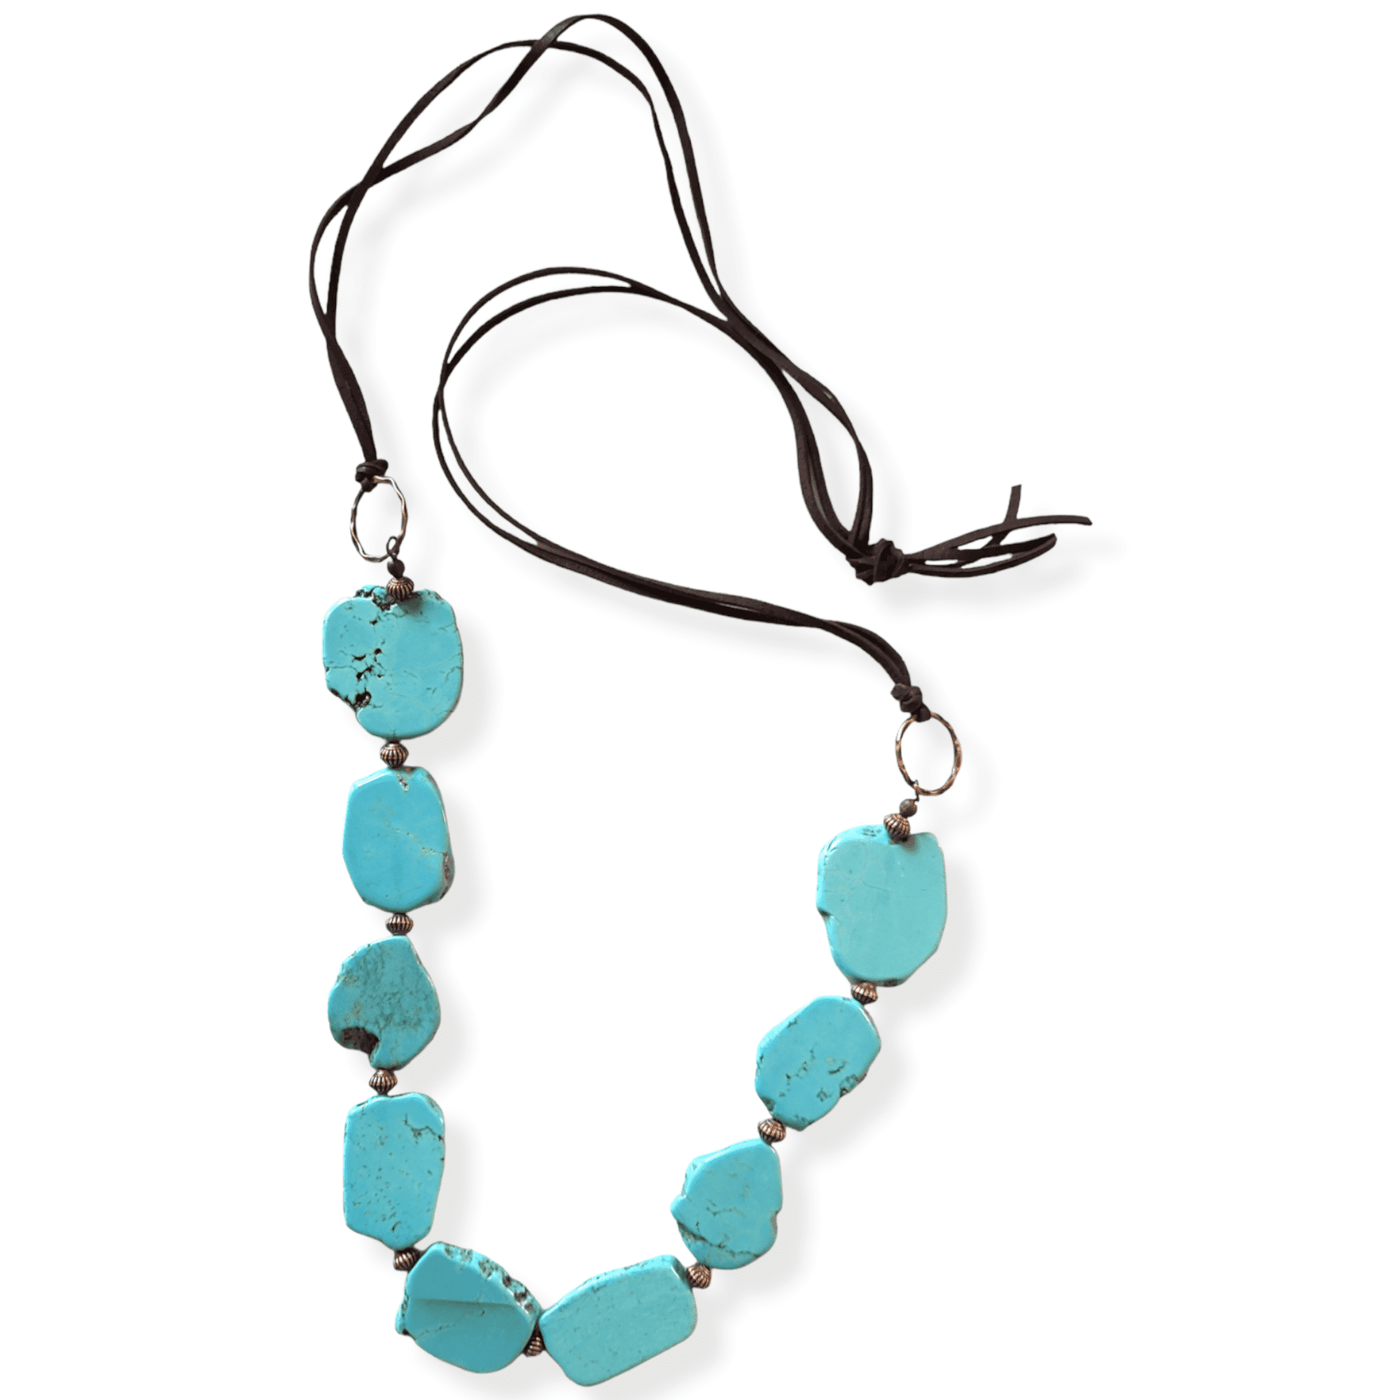 Blue Turquoise Slab Necklace with Leather Ties - Ranch Junkie Mercantile LLC